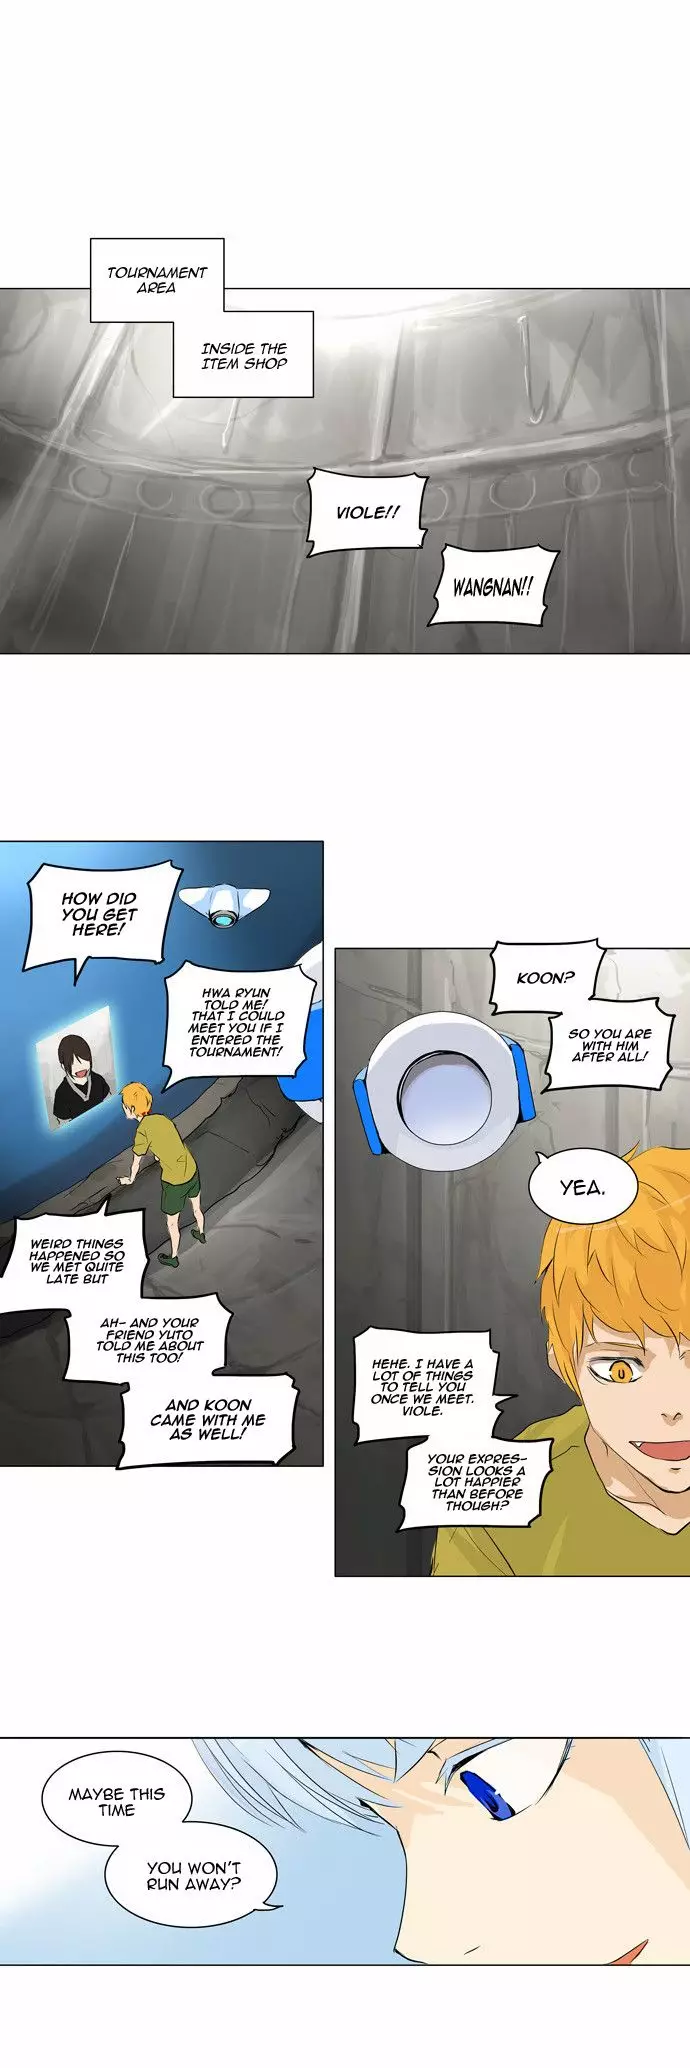 Tower of God - 172 page p_00026